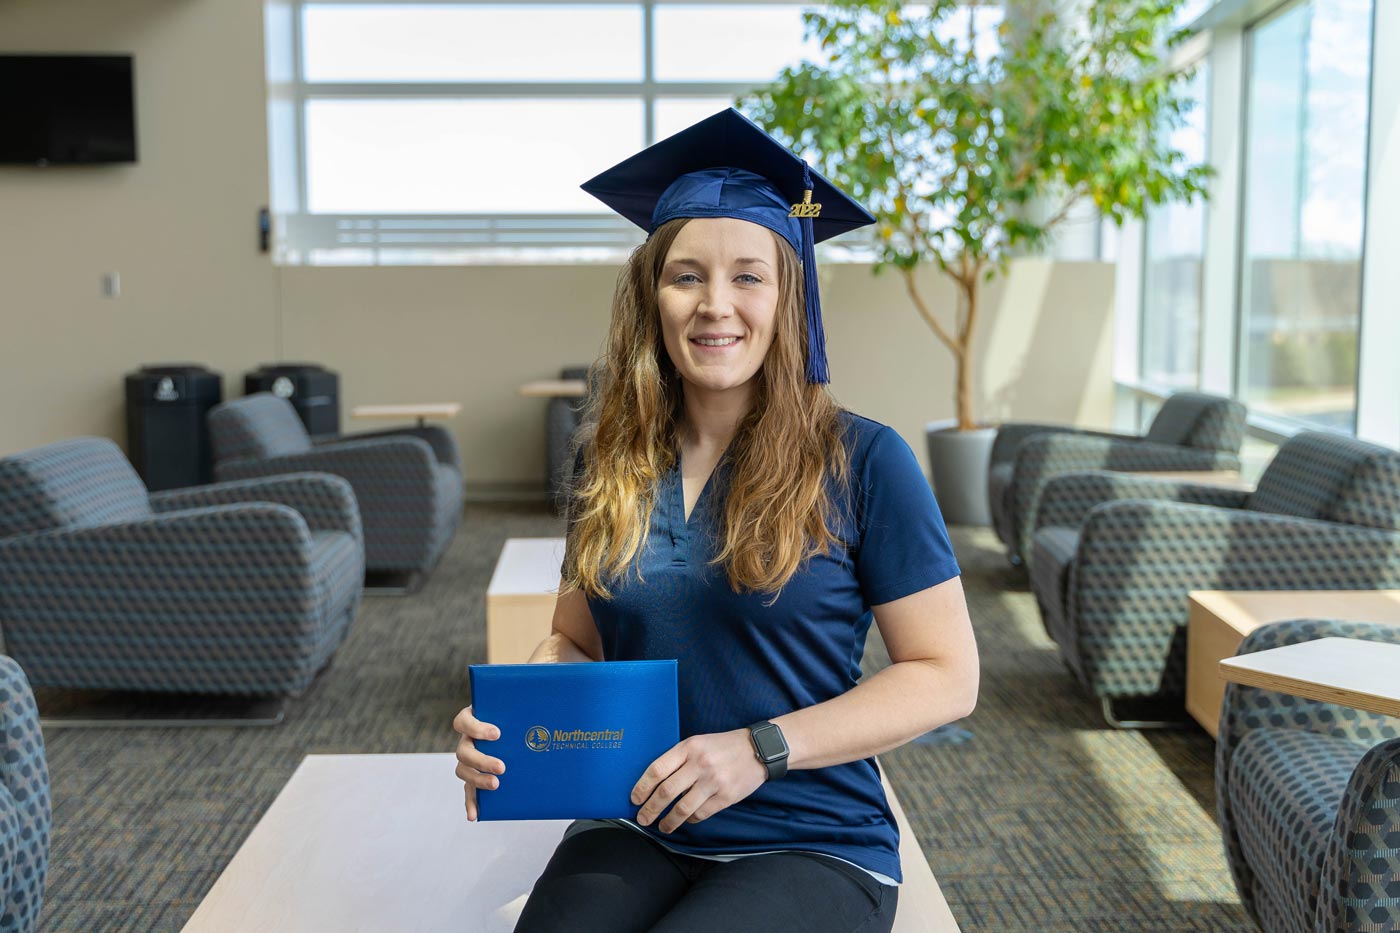 Victoria posing while wearing an NTC graduation cap and holding her diploma.